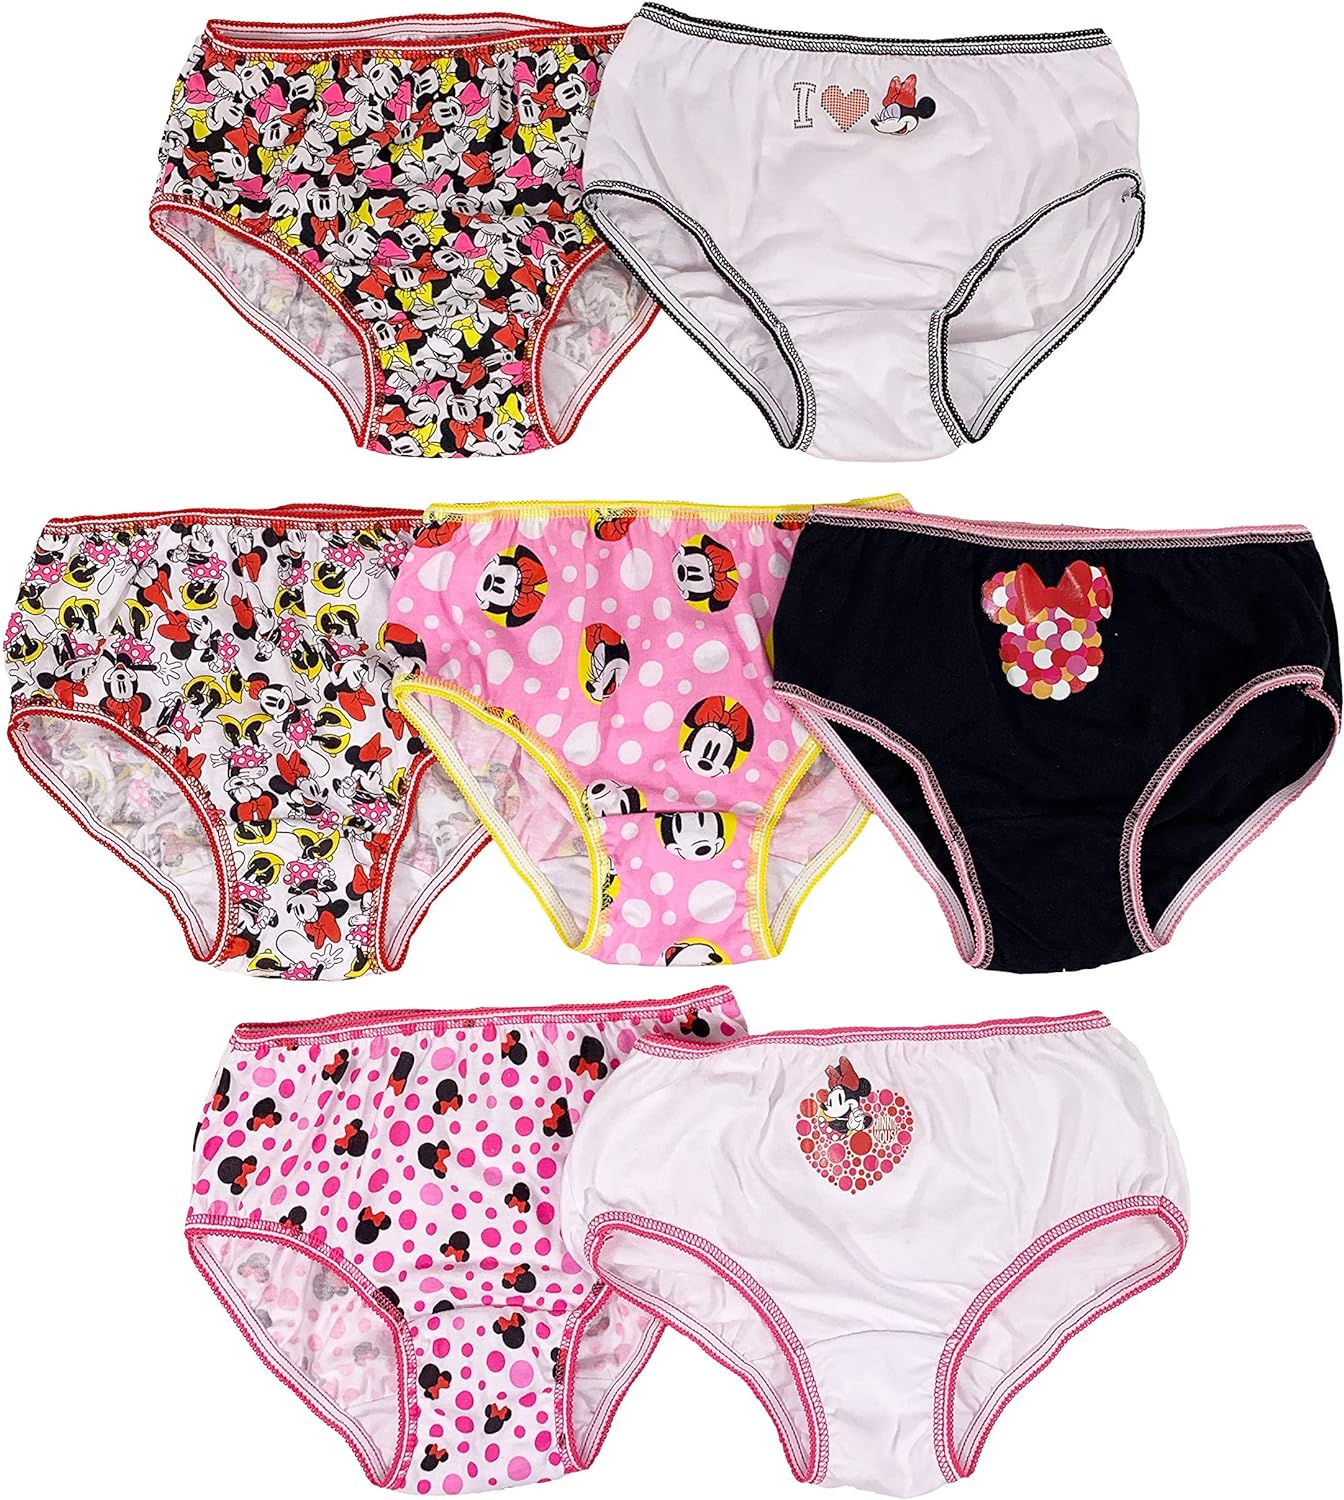 Disney Girls' Minnie Mouse Underwear Multipacks with Assorted Prints in Sizes 2/3t, 4t, 4, 6, 8 and 10